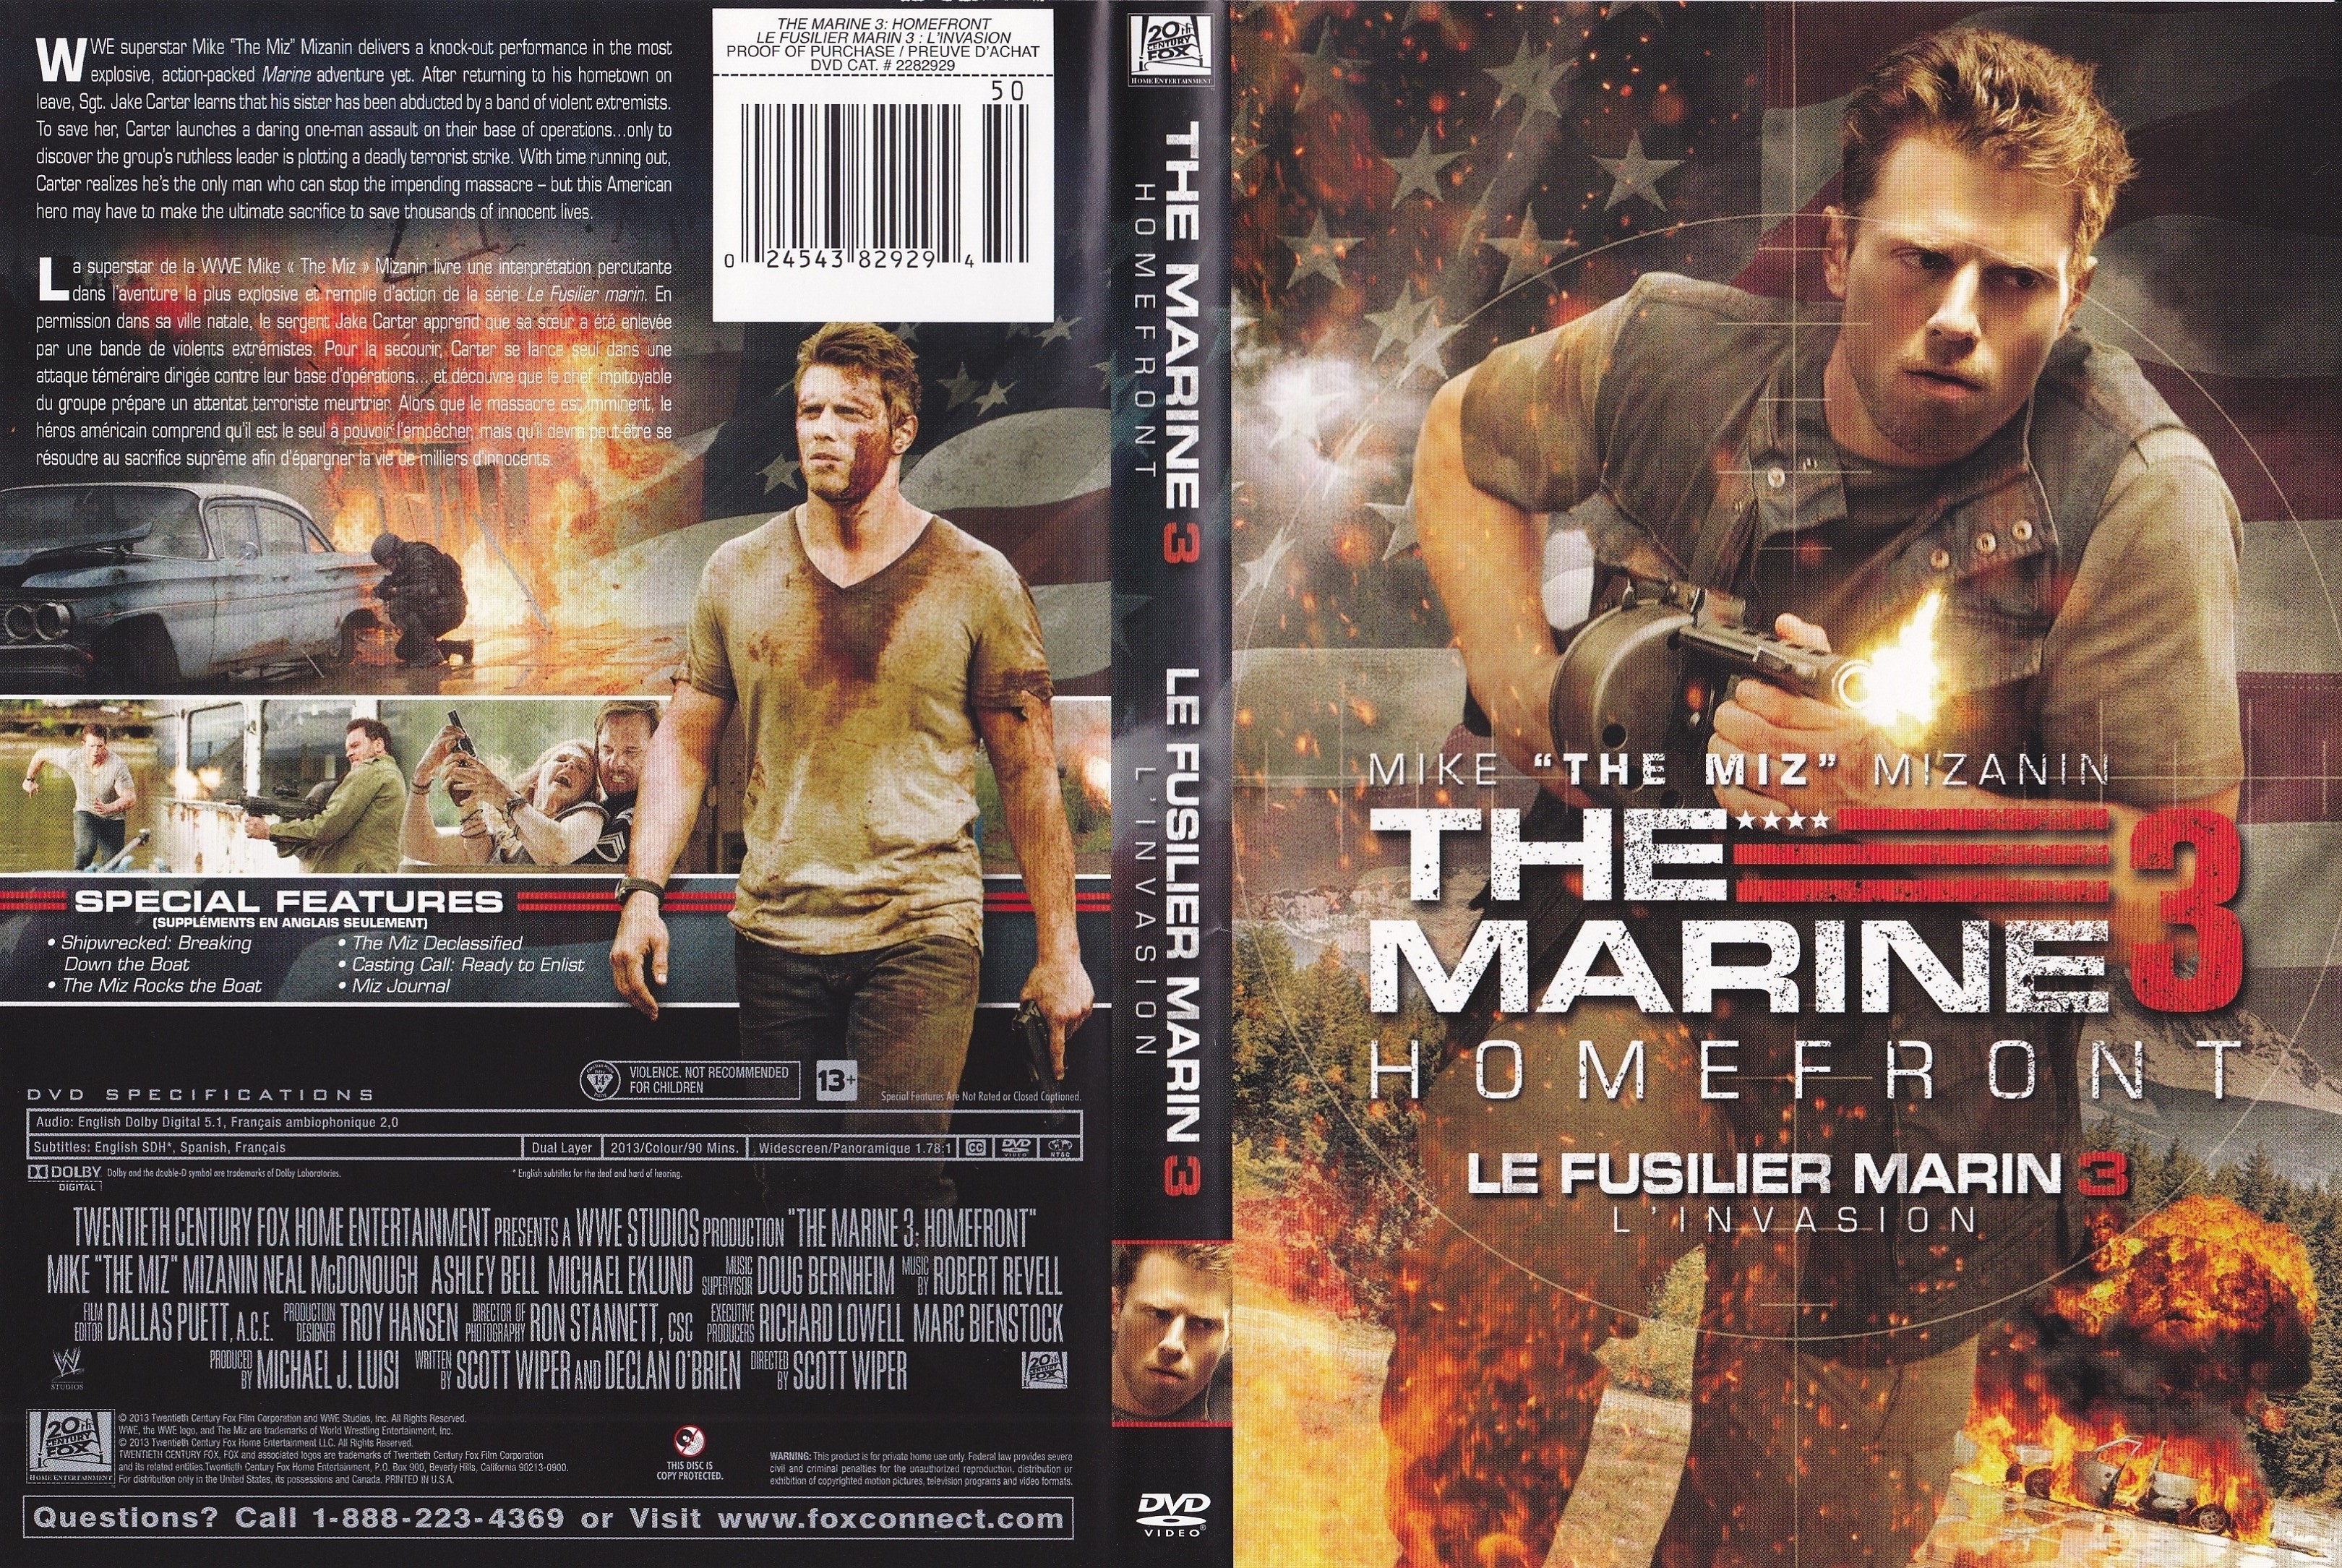 Jaquette DVD The marine 3 - Le fusilier marin 3 (Canadienne)